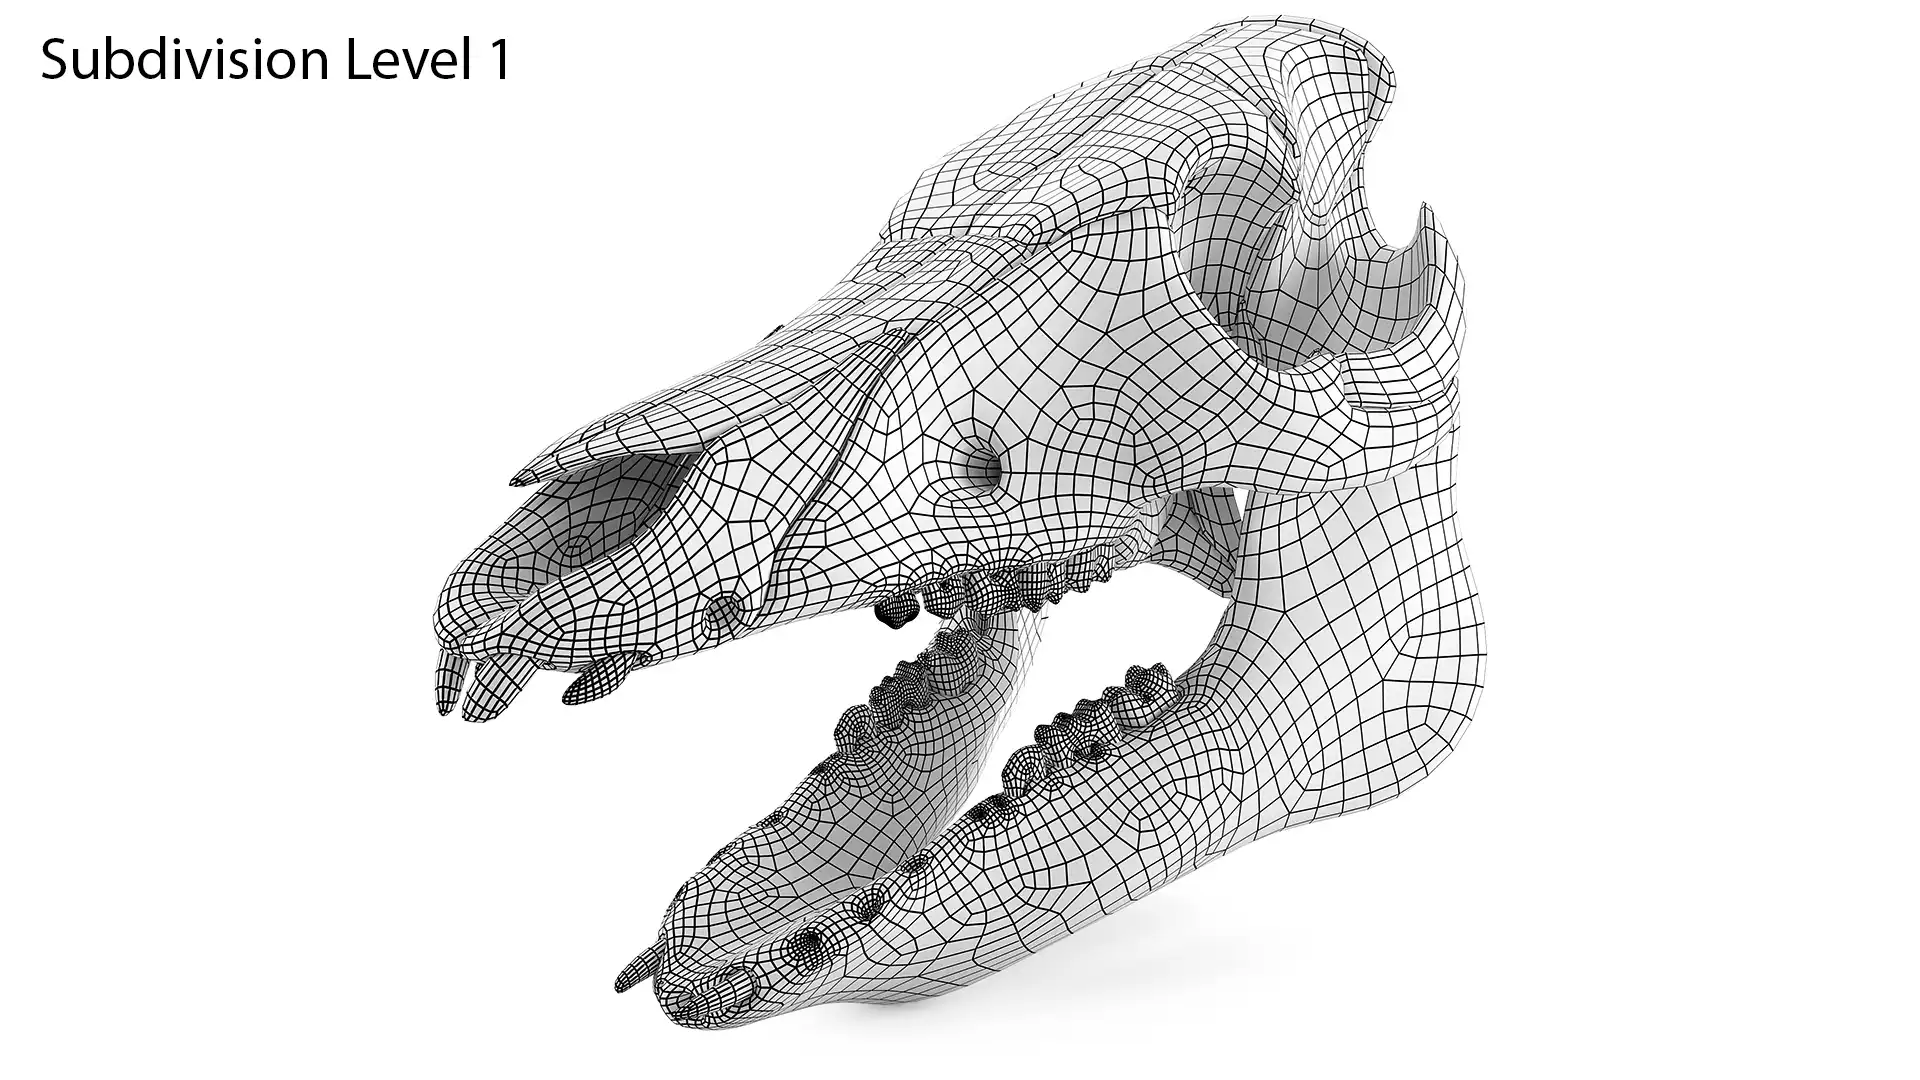 Wireframe rendering of subdivision ready pig skull 3d model with one subdivision level applied.